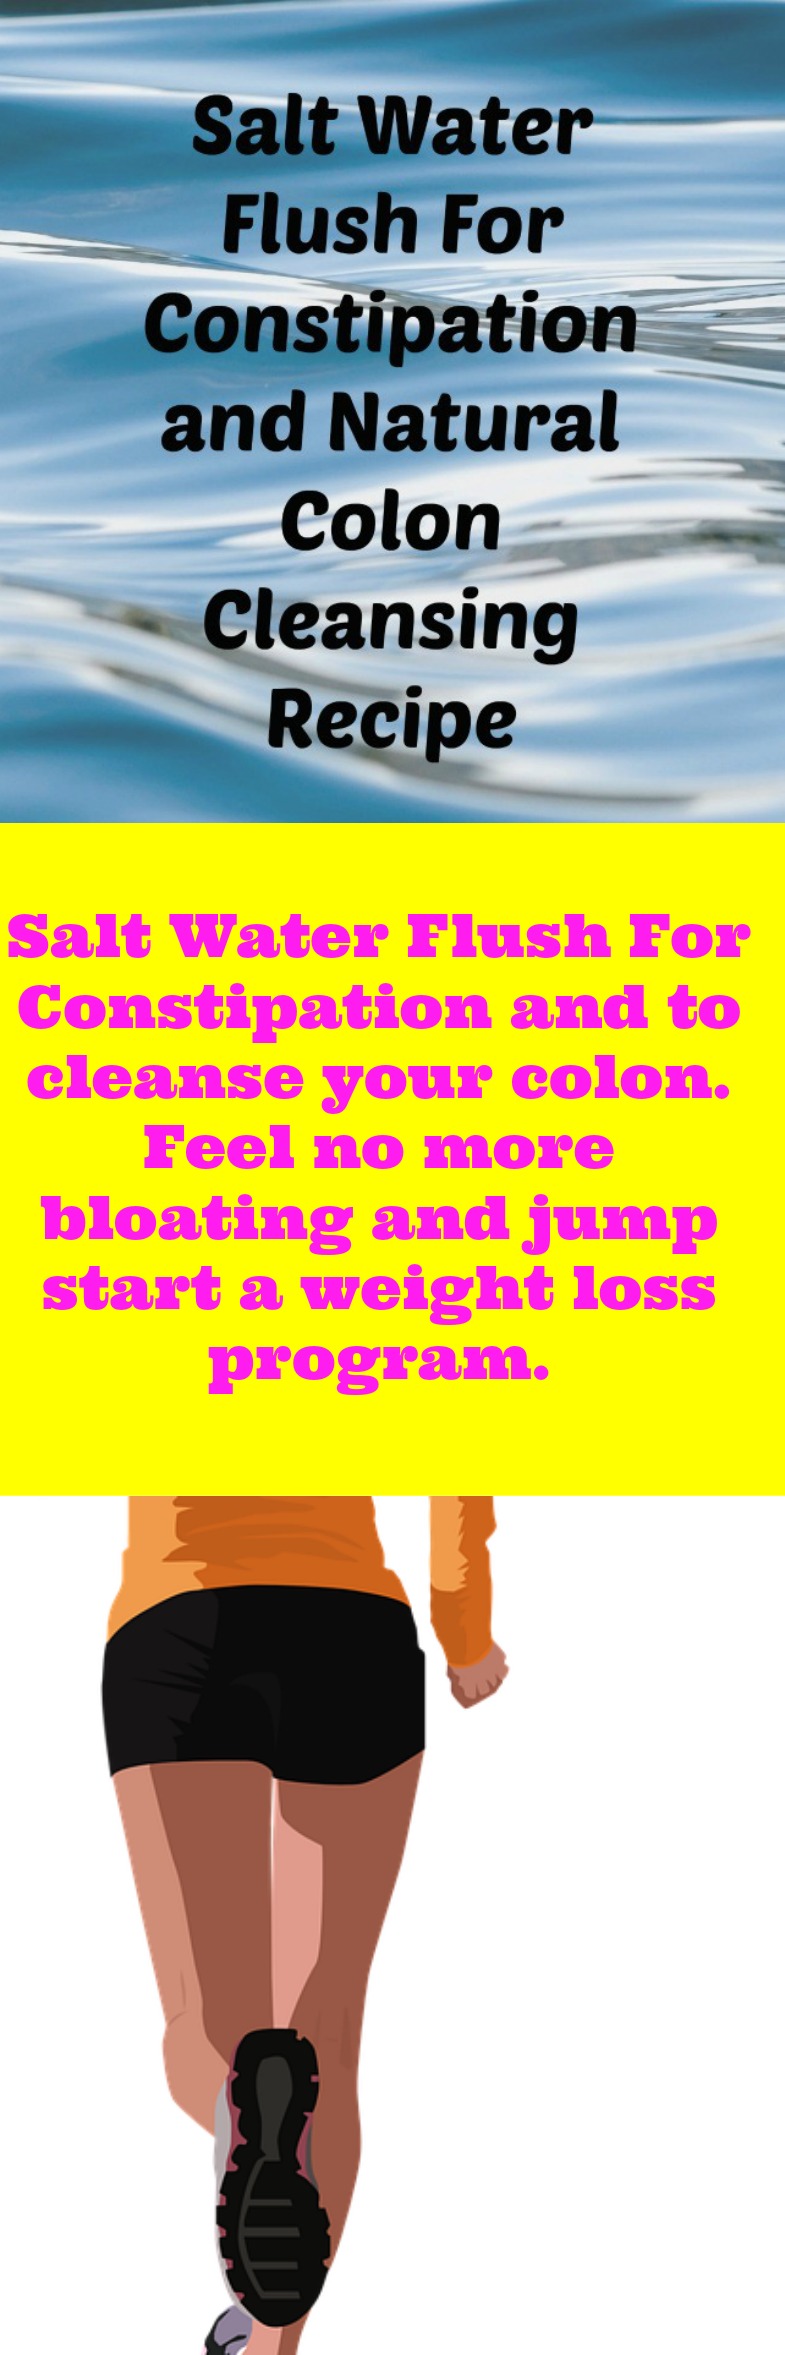 Salt Water detox cleanse to flush unwanted toxins and to lose weight. Jump-start your weightloss program. This Master Cleanse will give you results and tips for rapid weight loss.